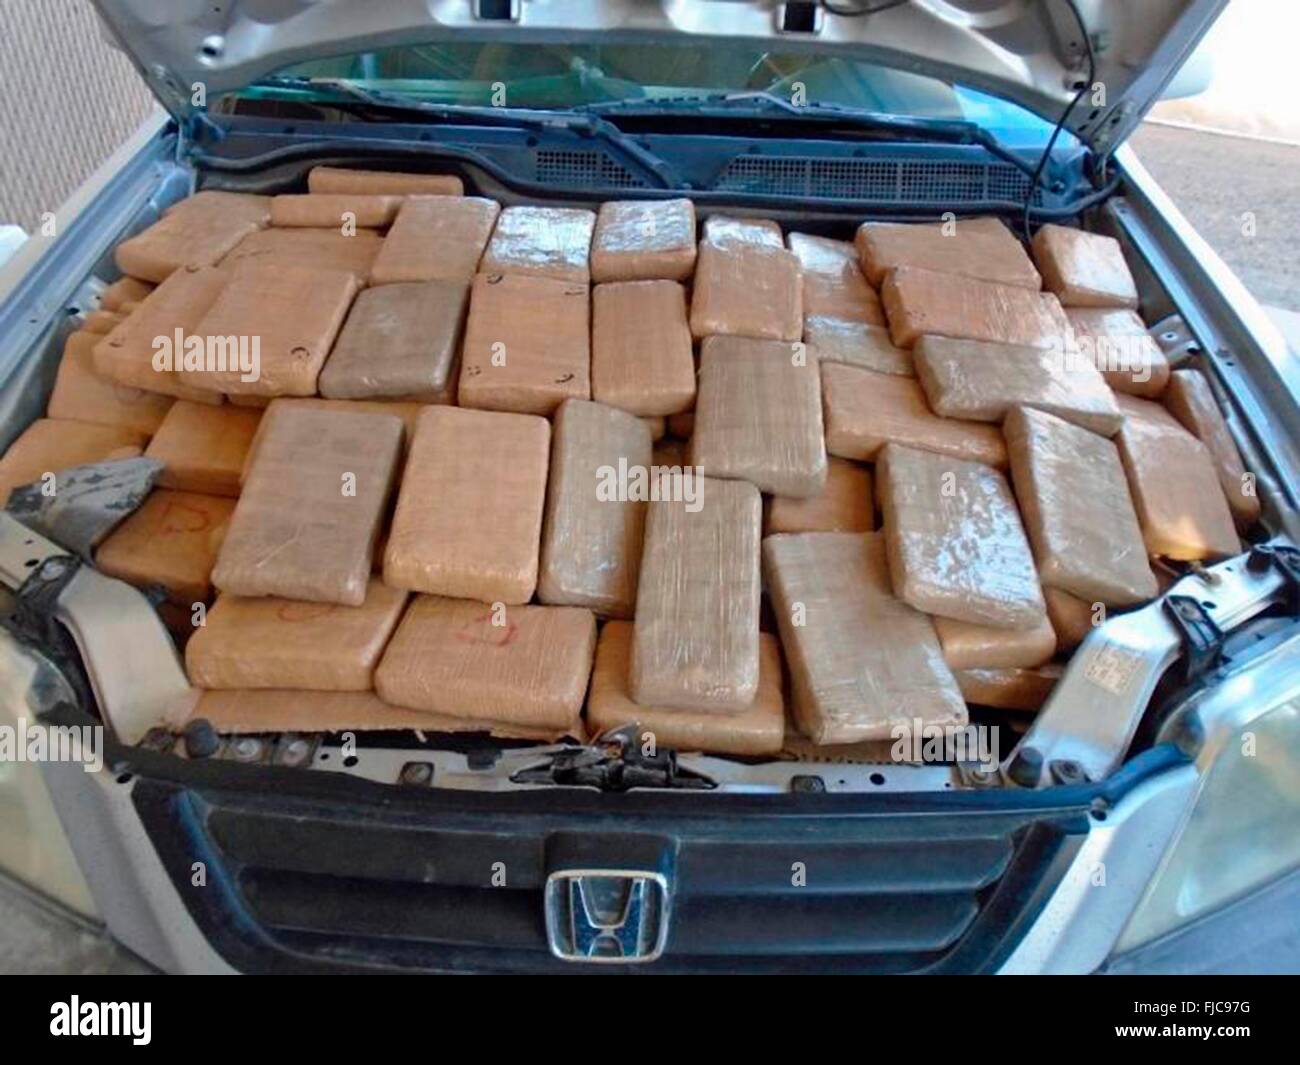 Packages of Marijuana packed into the engine compartment of a vehicle discovered after a U.S Customs and Border Patrol sniffer dog detected the illegal contraband at the Port of Douglas border Crossing January 29, 2016 near Tucson, Arizona. The seizure totaled more than 226 pounds of marijuana worth $113K. Stock Photo